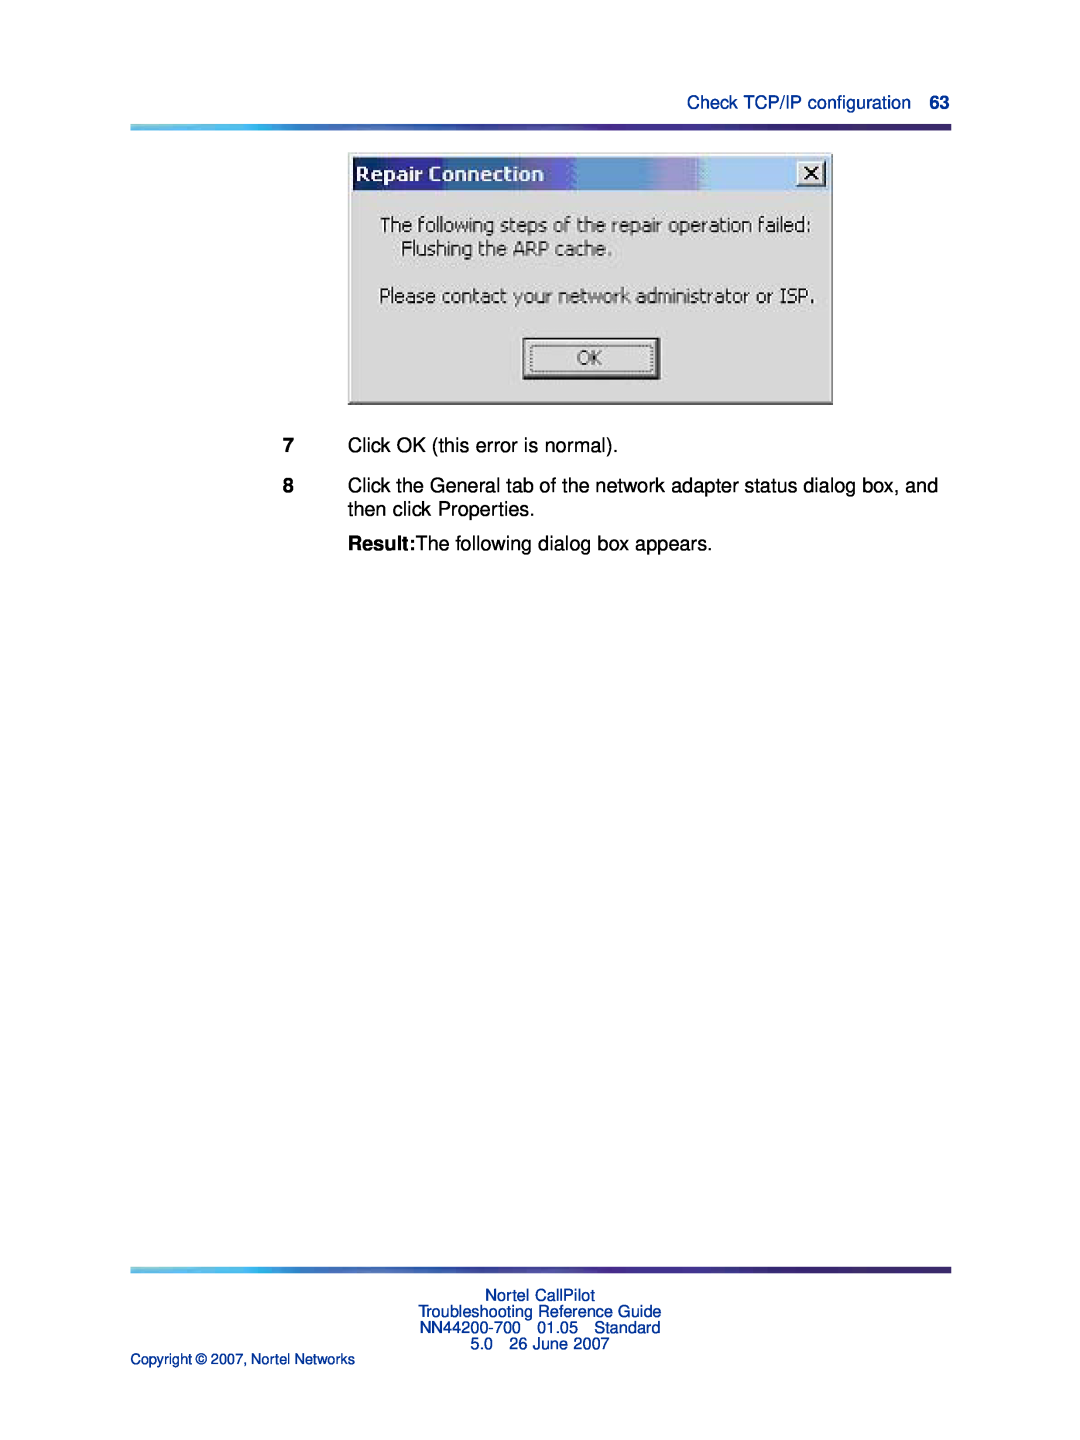 Nortel Networks NN44200-700 manual Click OK this error is normal, ResultThe following dialog box appears 